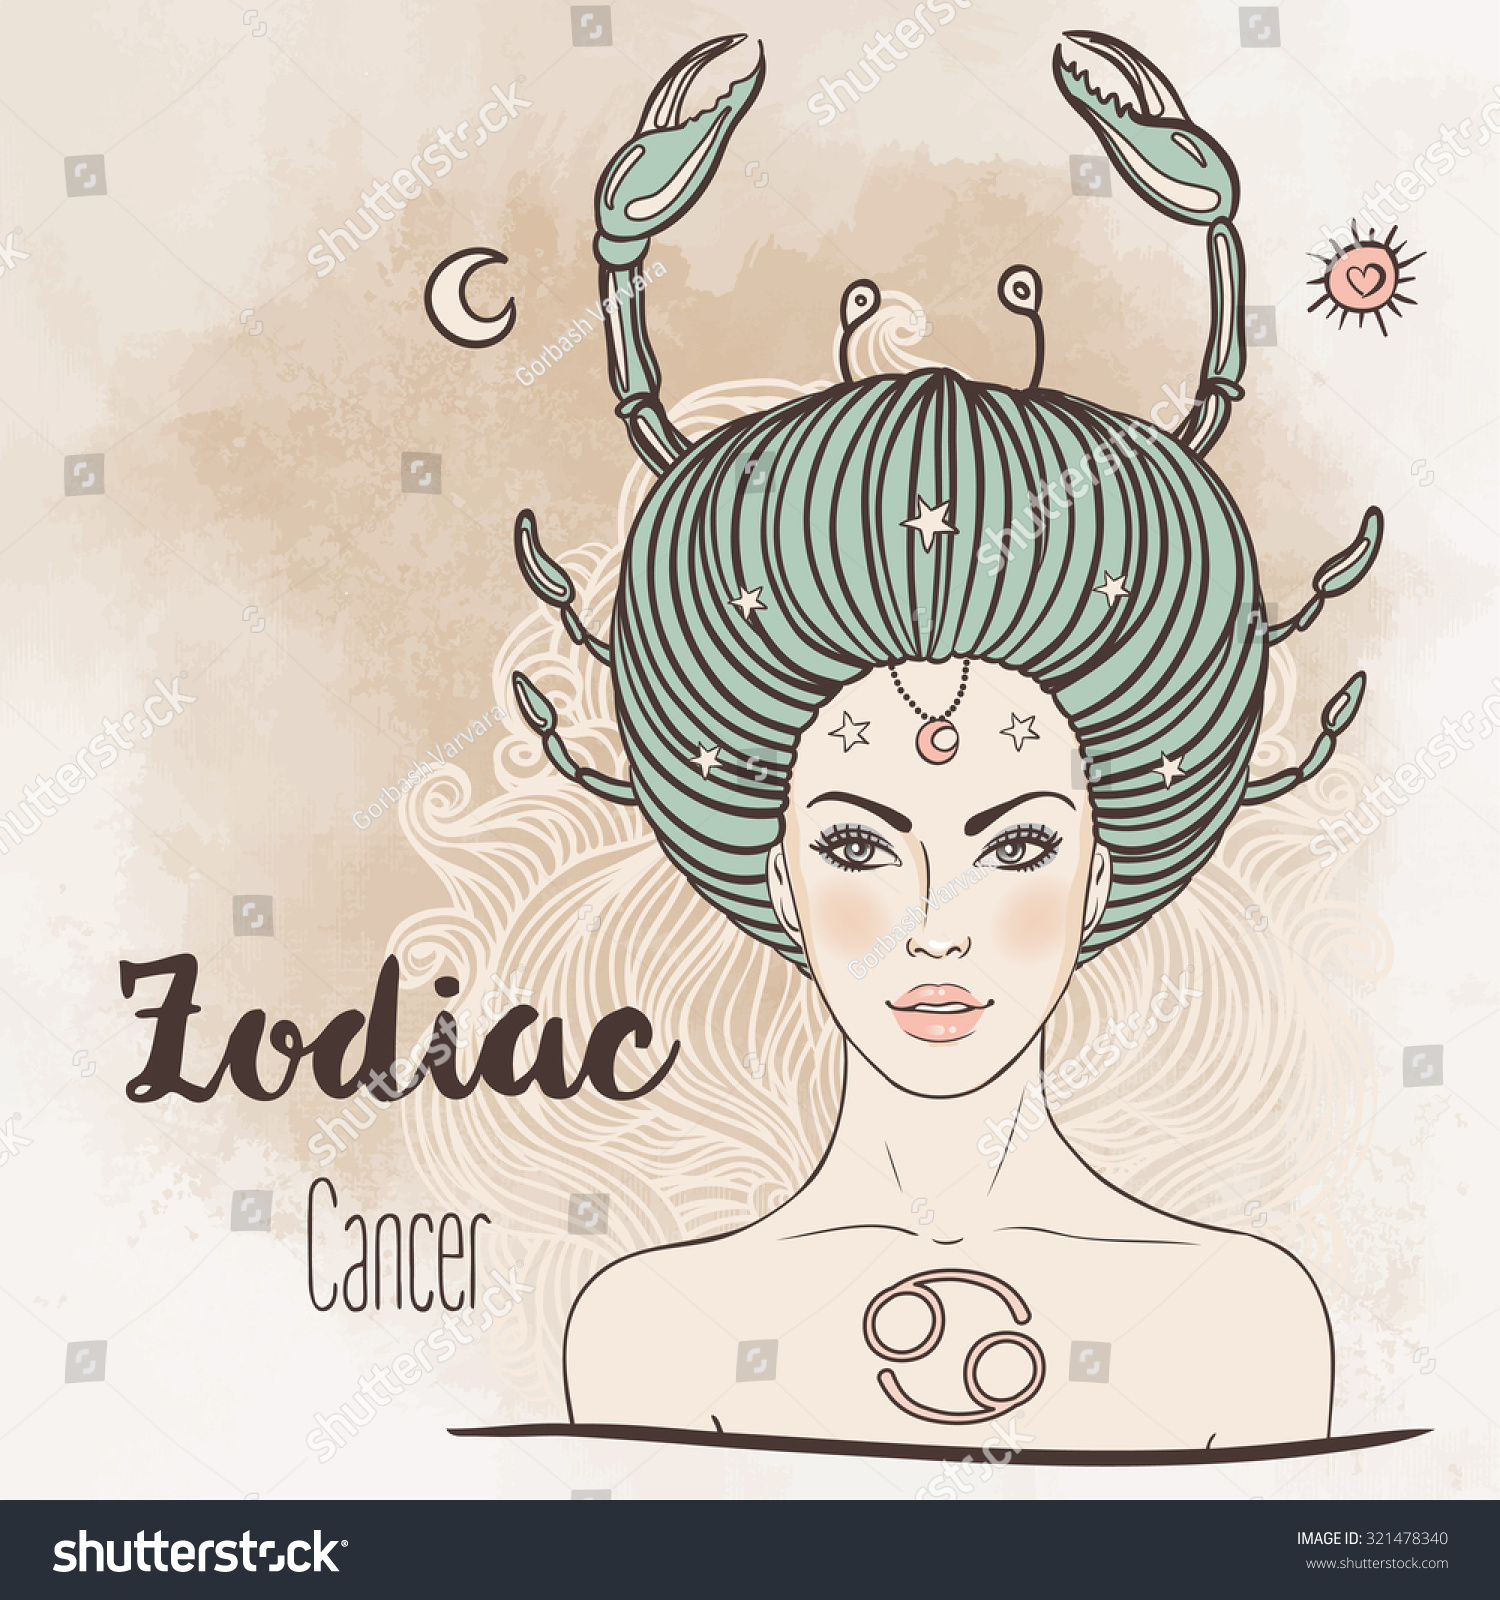 Zodiac: Illustration Of Cancer Astrological Sign As A Beautiful Girl ...